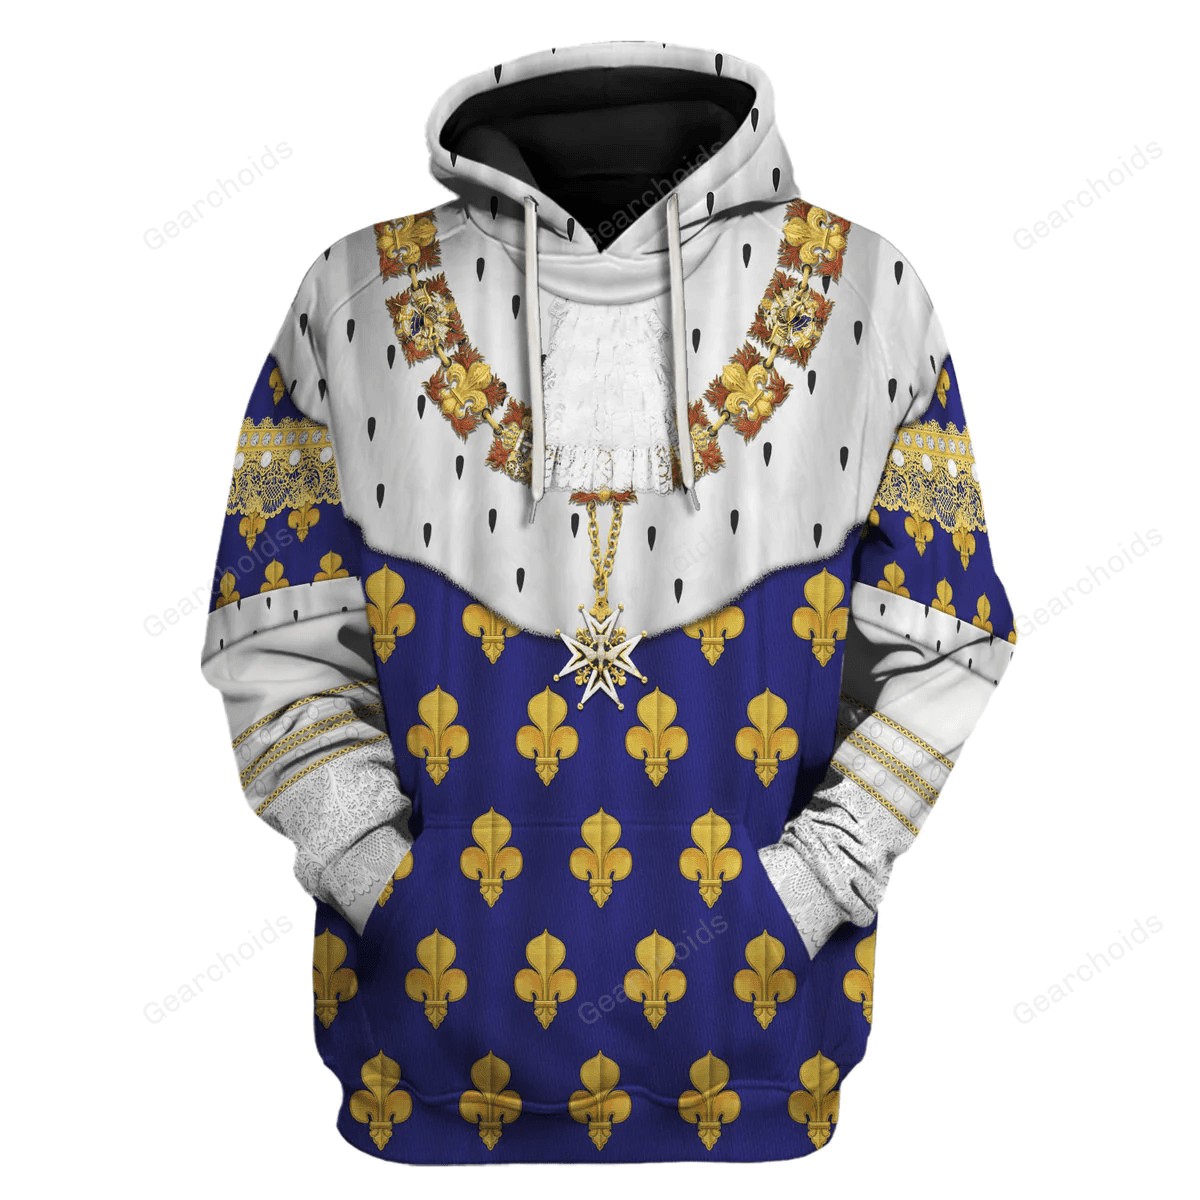 Gearchoids Louis XV of France in Coronation Robes Costume All Over Print Hoodie Sweatshirt T-Shirt Tracksuit